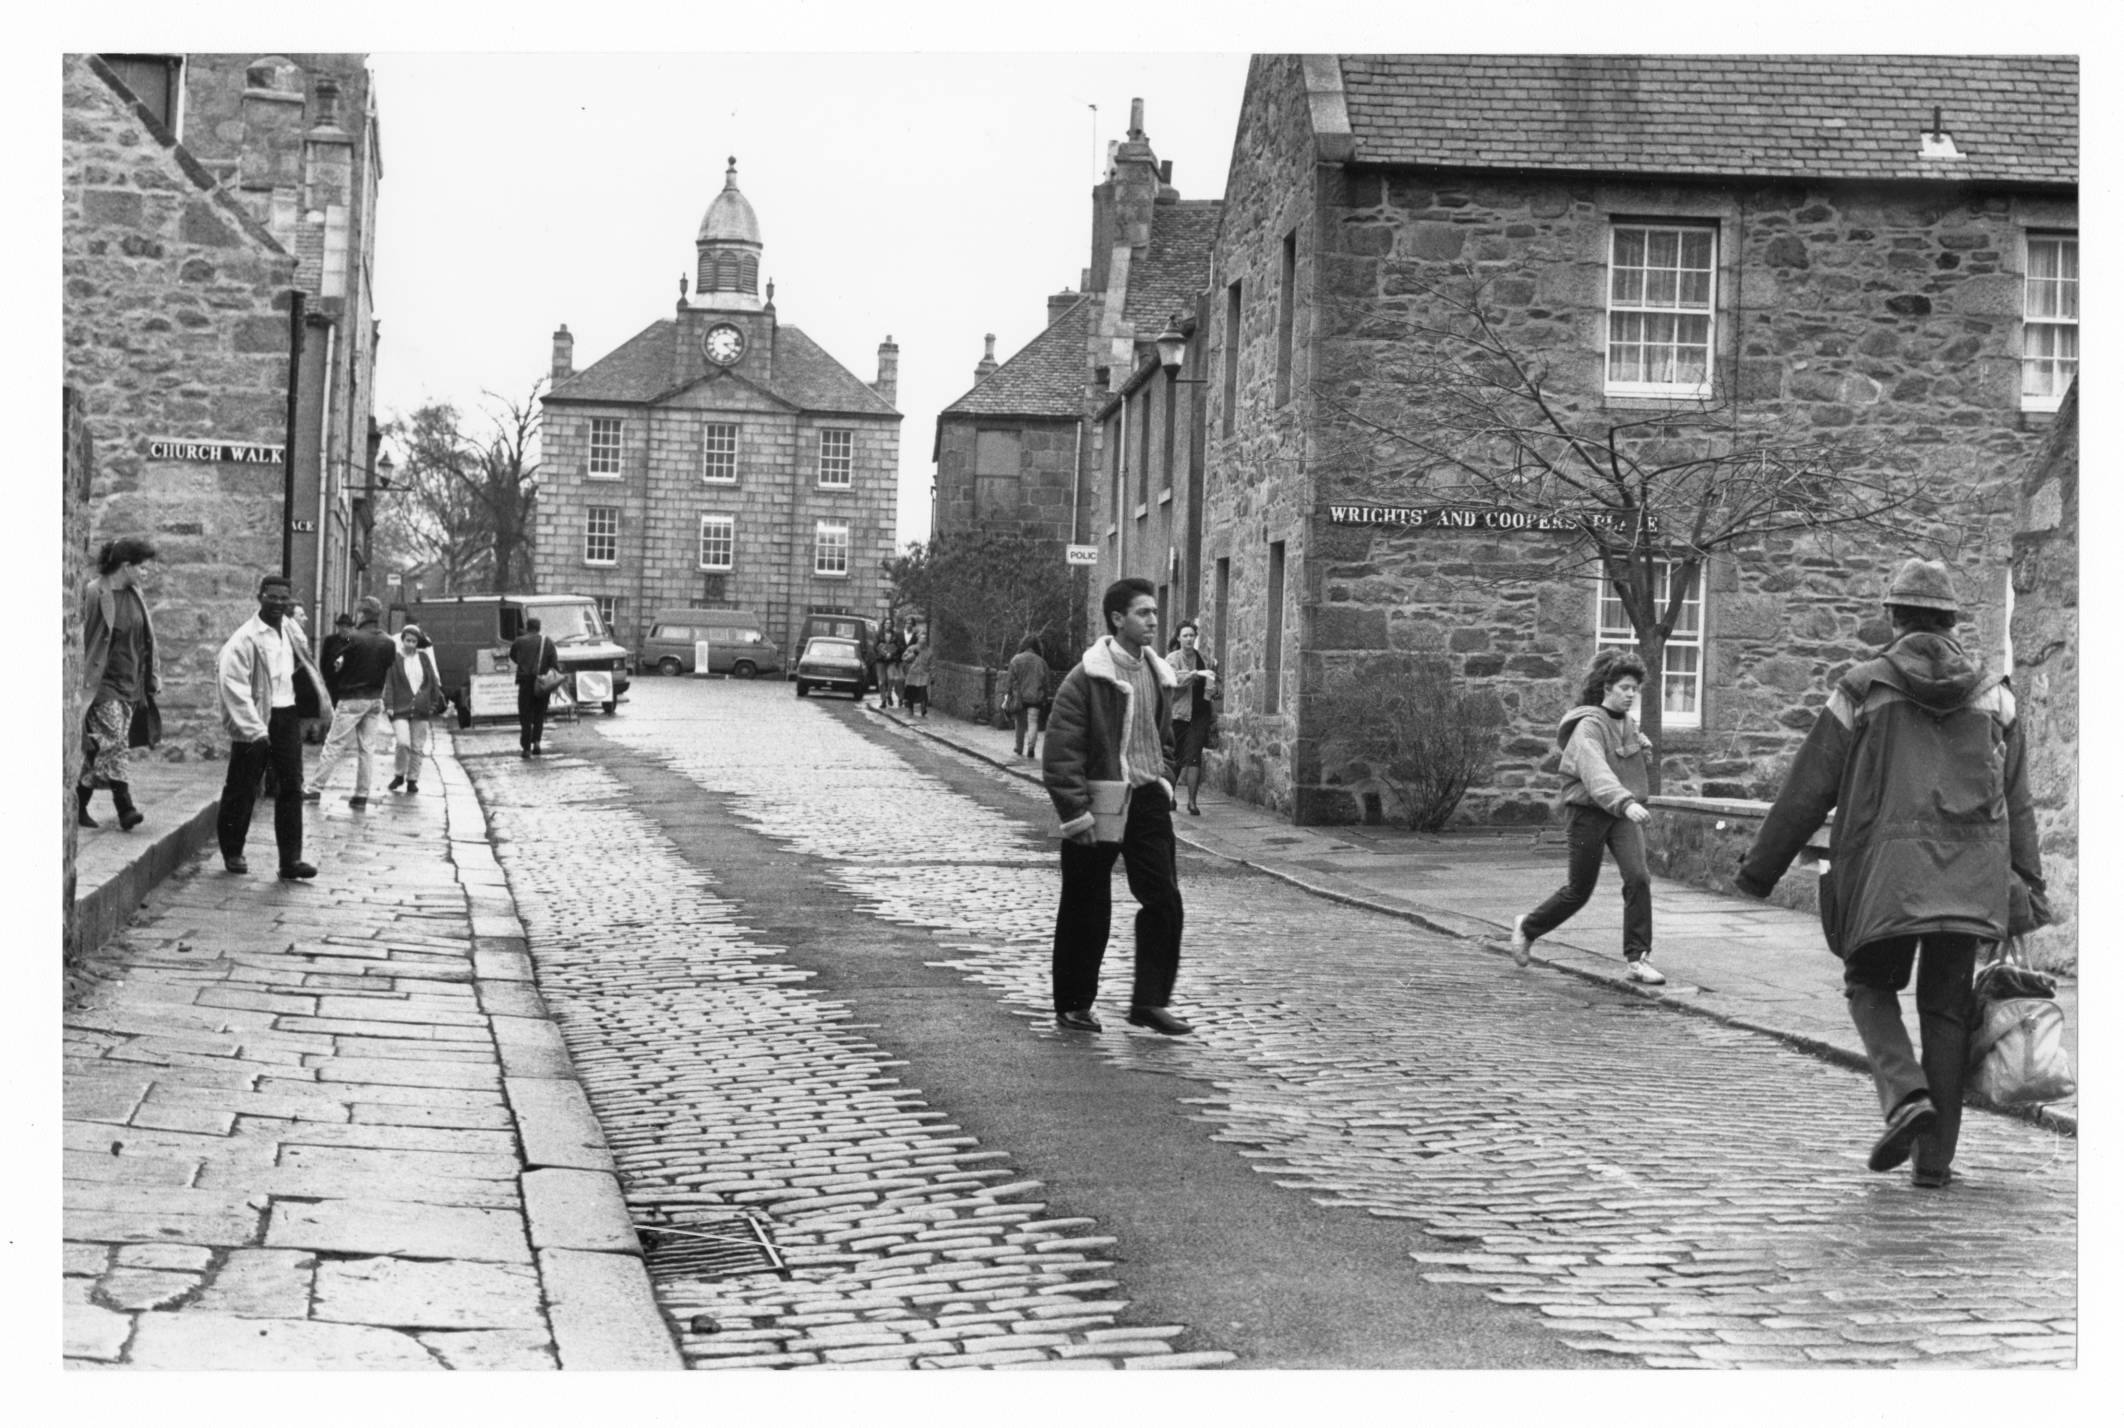 1190: A view of the High Street of Old Aberdeen showing Church Walk and Wright's and Copper's Place.